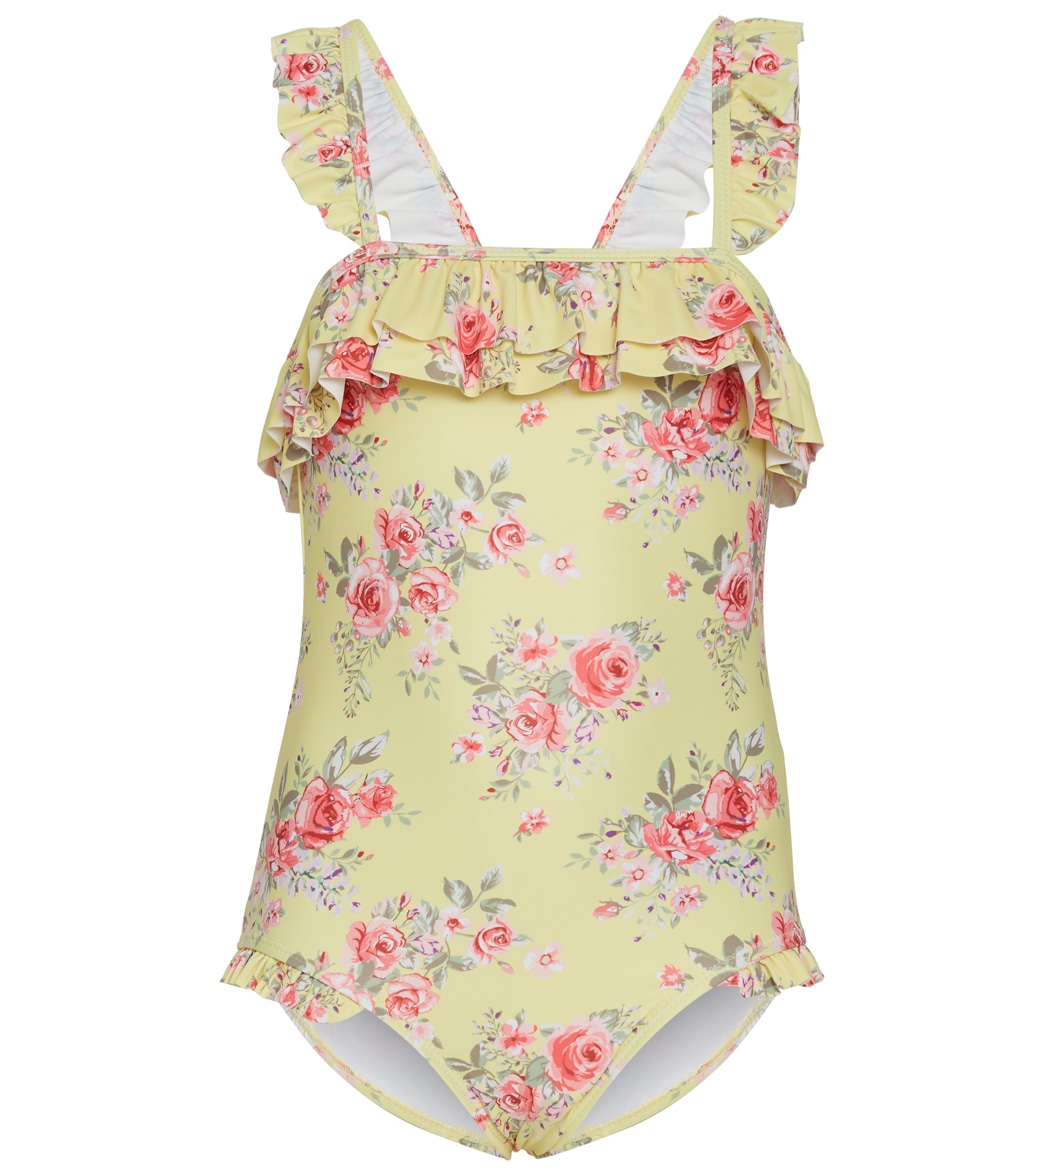 Seafolly Girls' Paradise Garden Ruffle Bandeau One Piece Swimsuit Baby Toddler - Floral 1 - Swimoutlet.com